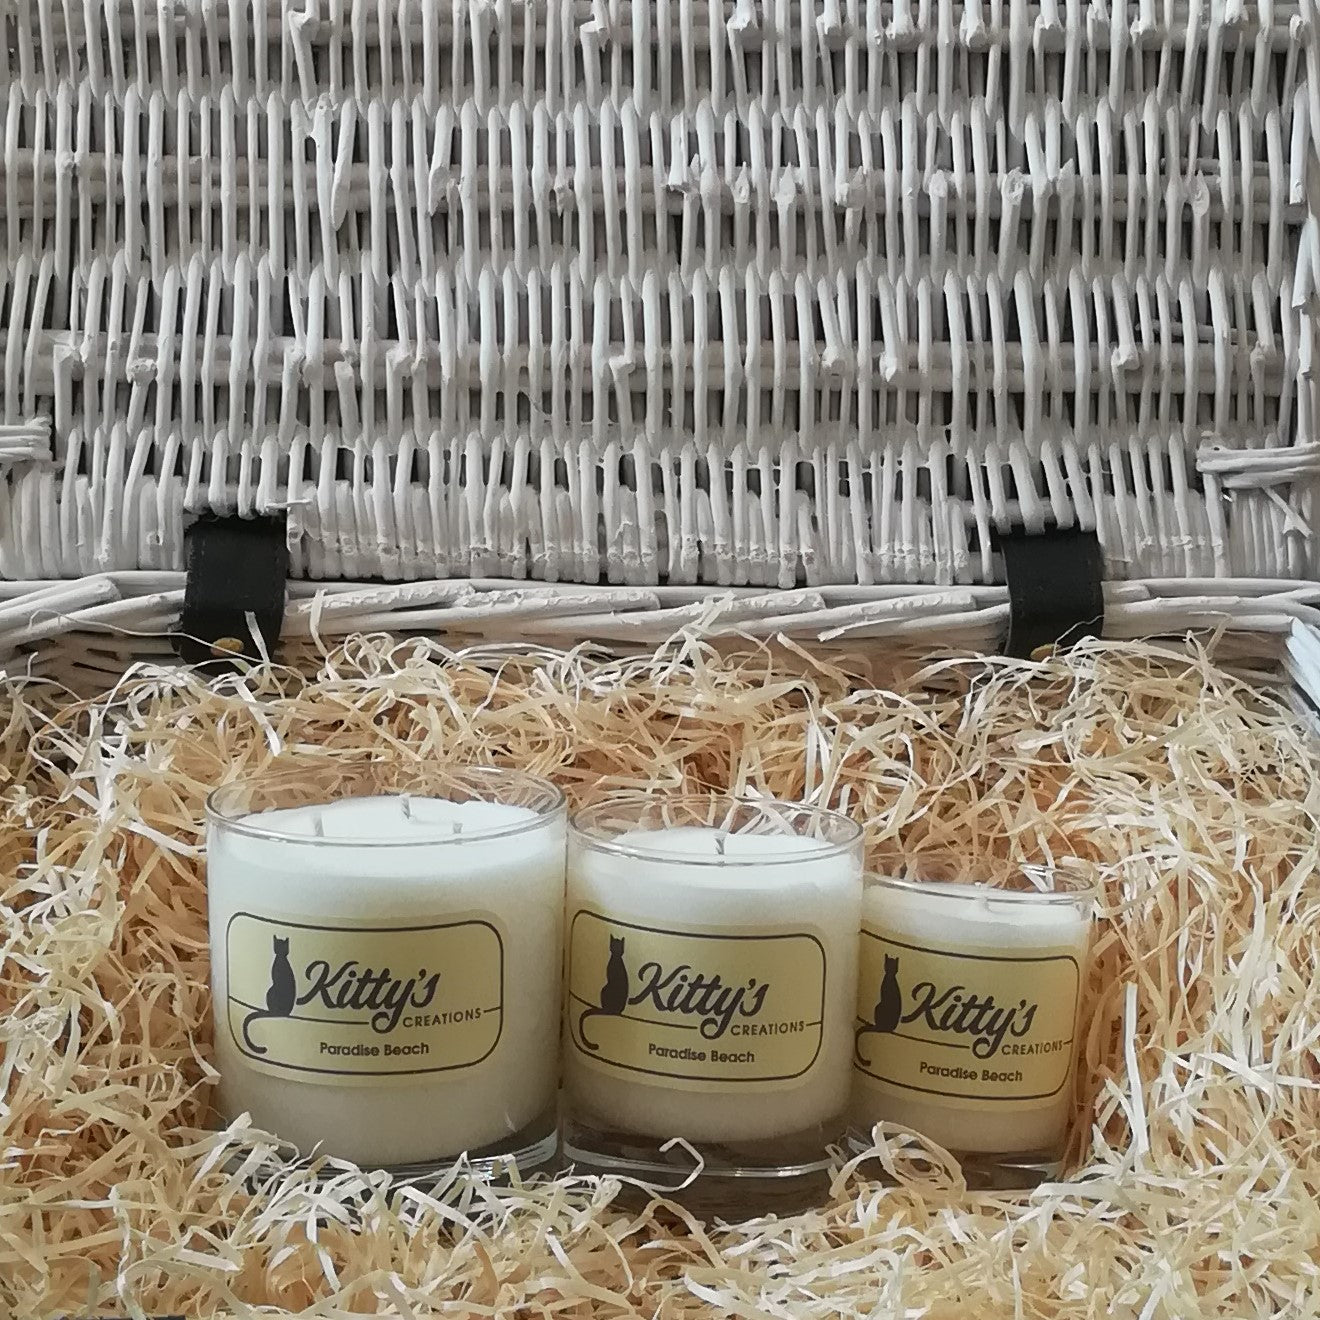 Three white candles, one large, one medium and one small are pictured in a basket of straw. Hand poured with soy wax, in elegant glass tumblers and available in three different sizes, these candles are the perfect gift. Each reveals a scent evoking warm sunshine, a tropical shore with pristine white sands, a perfect holiday.